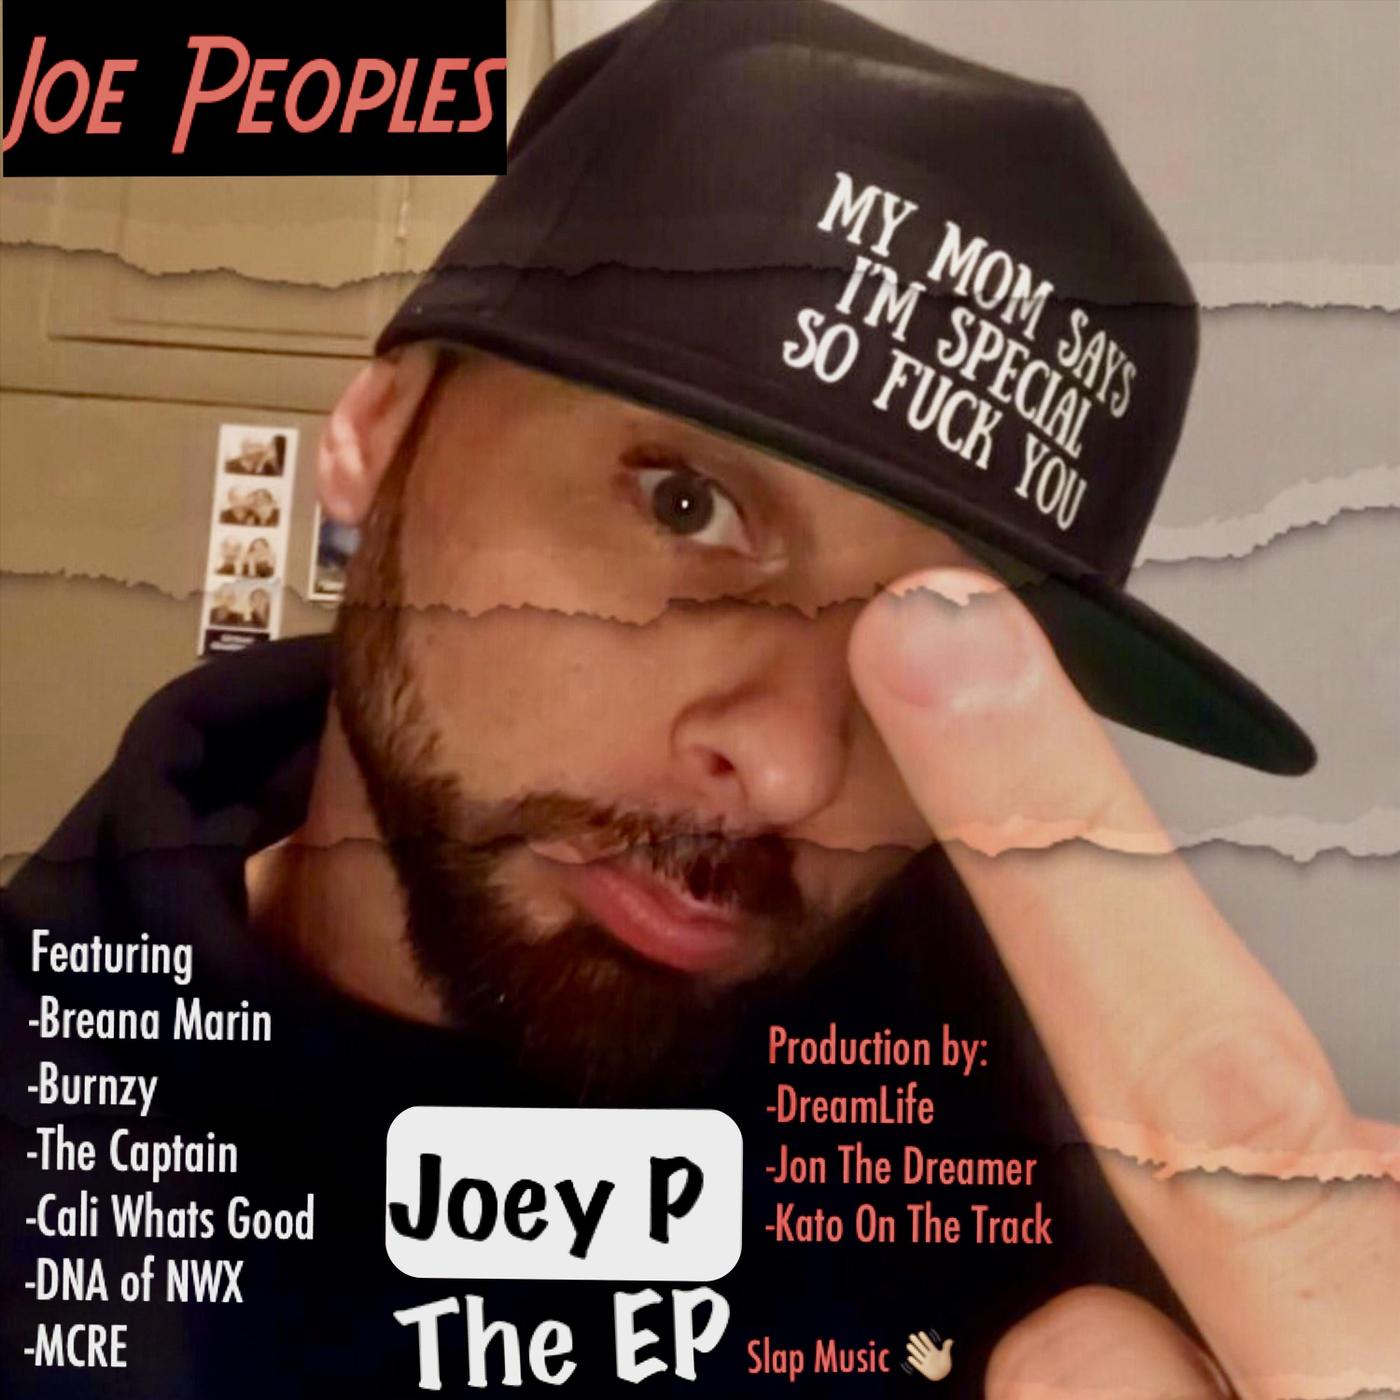 Joey P: The EP